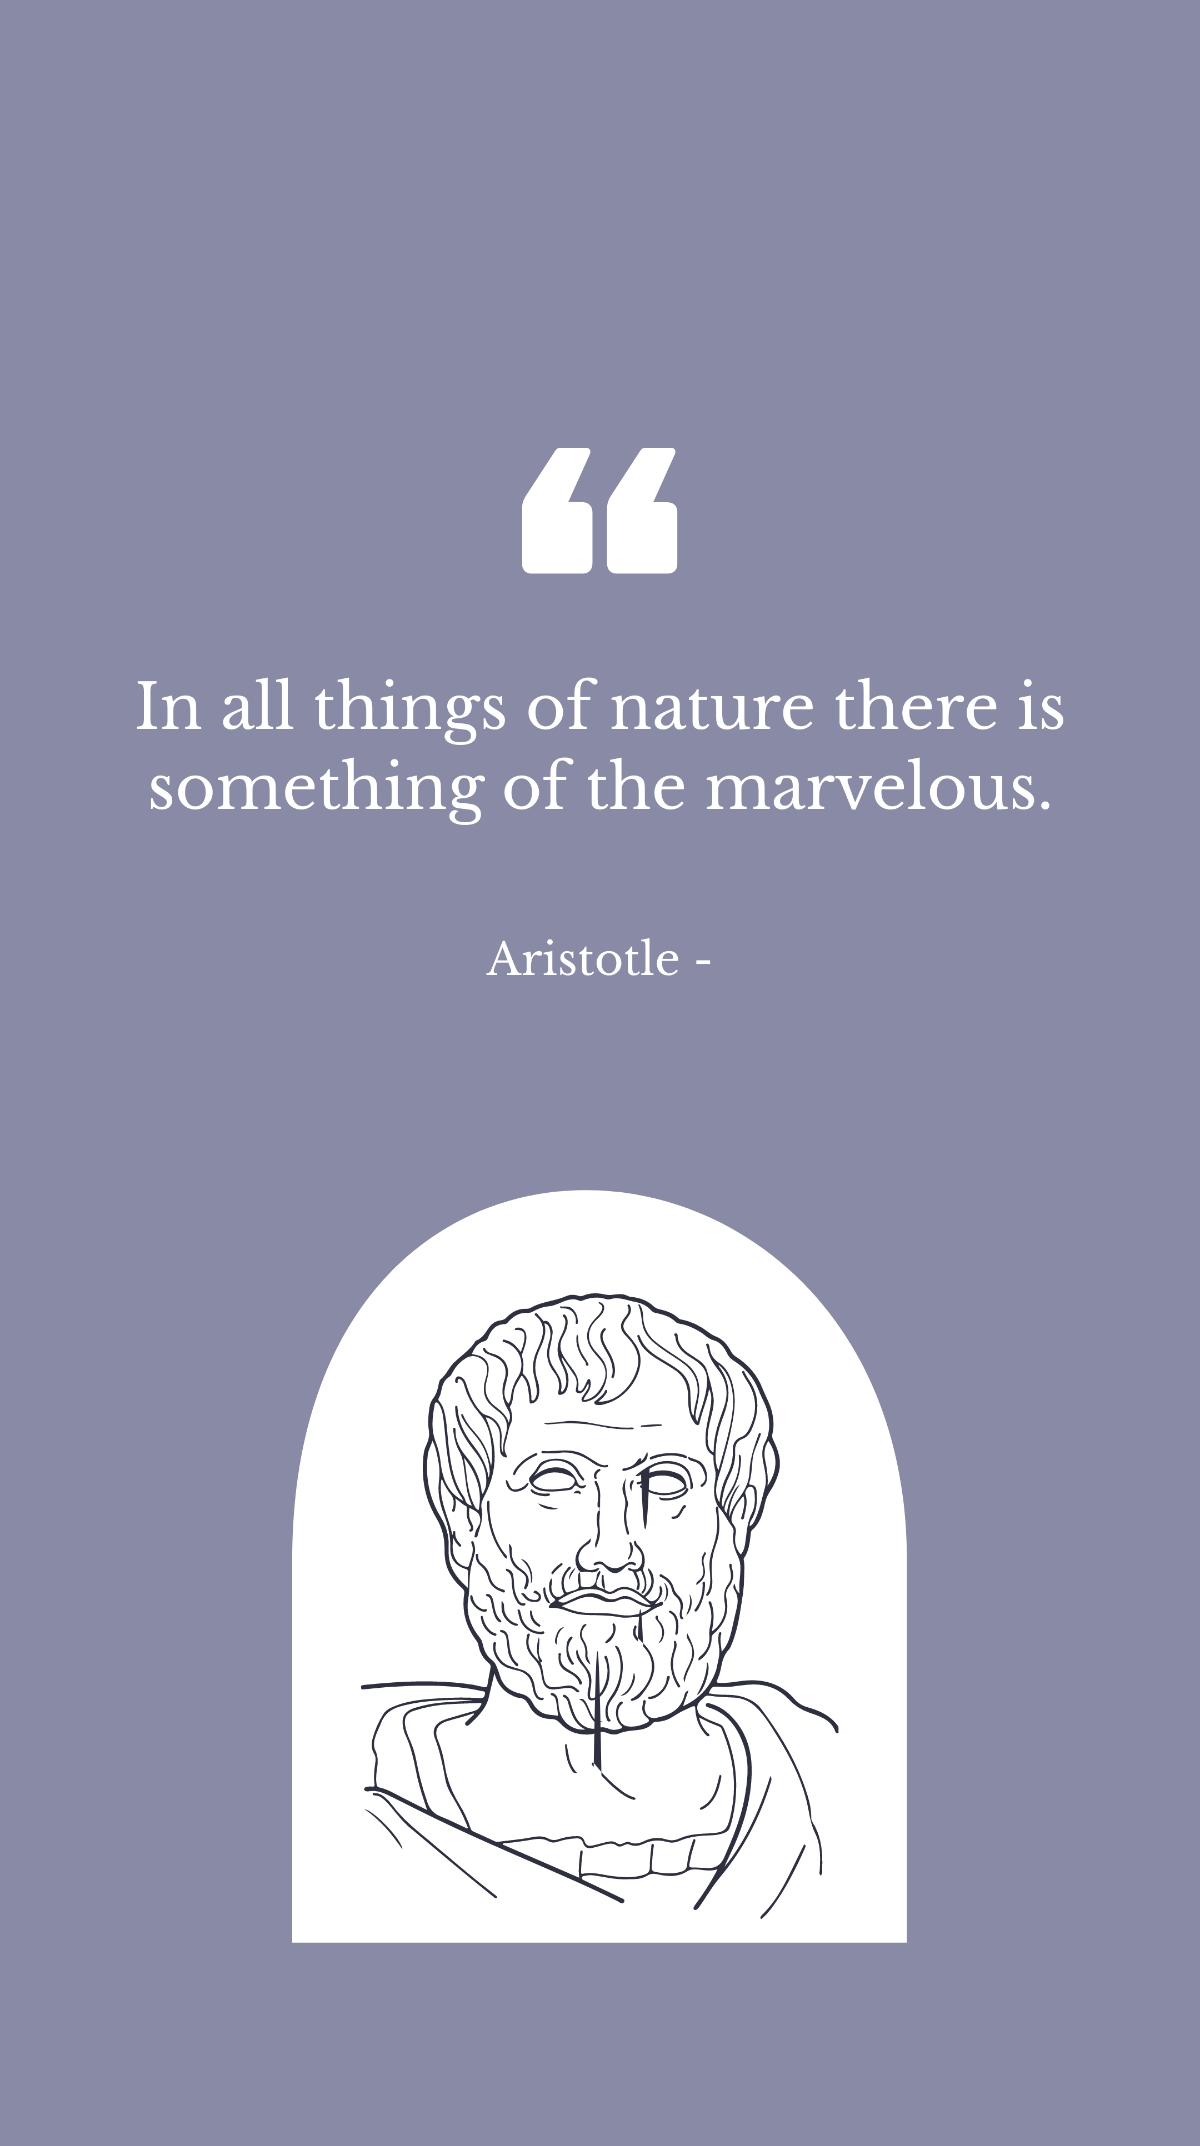 Aristotle - In all things of nature there is something of the marvelous. Template